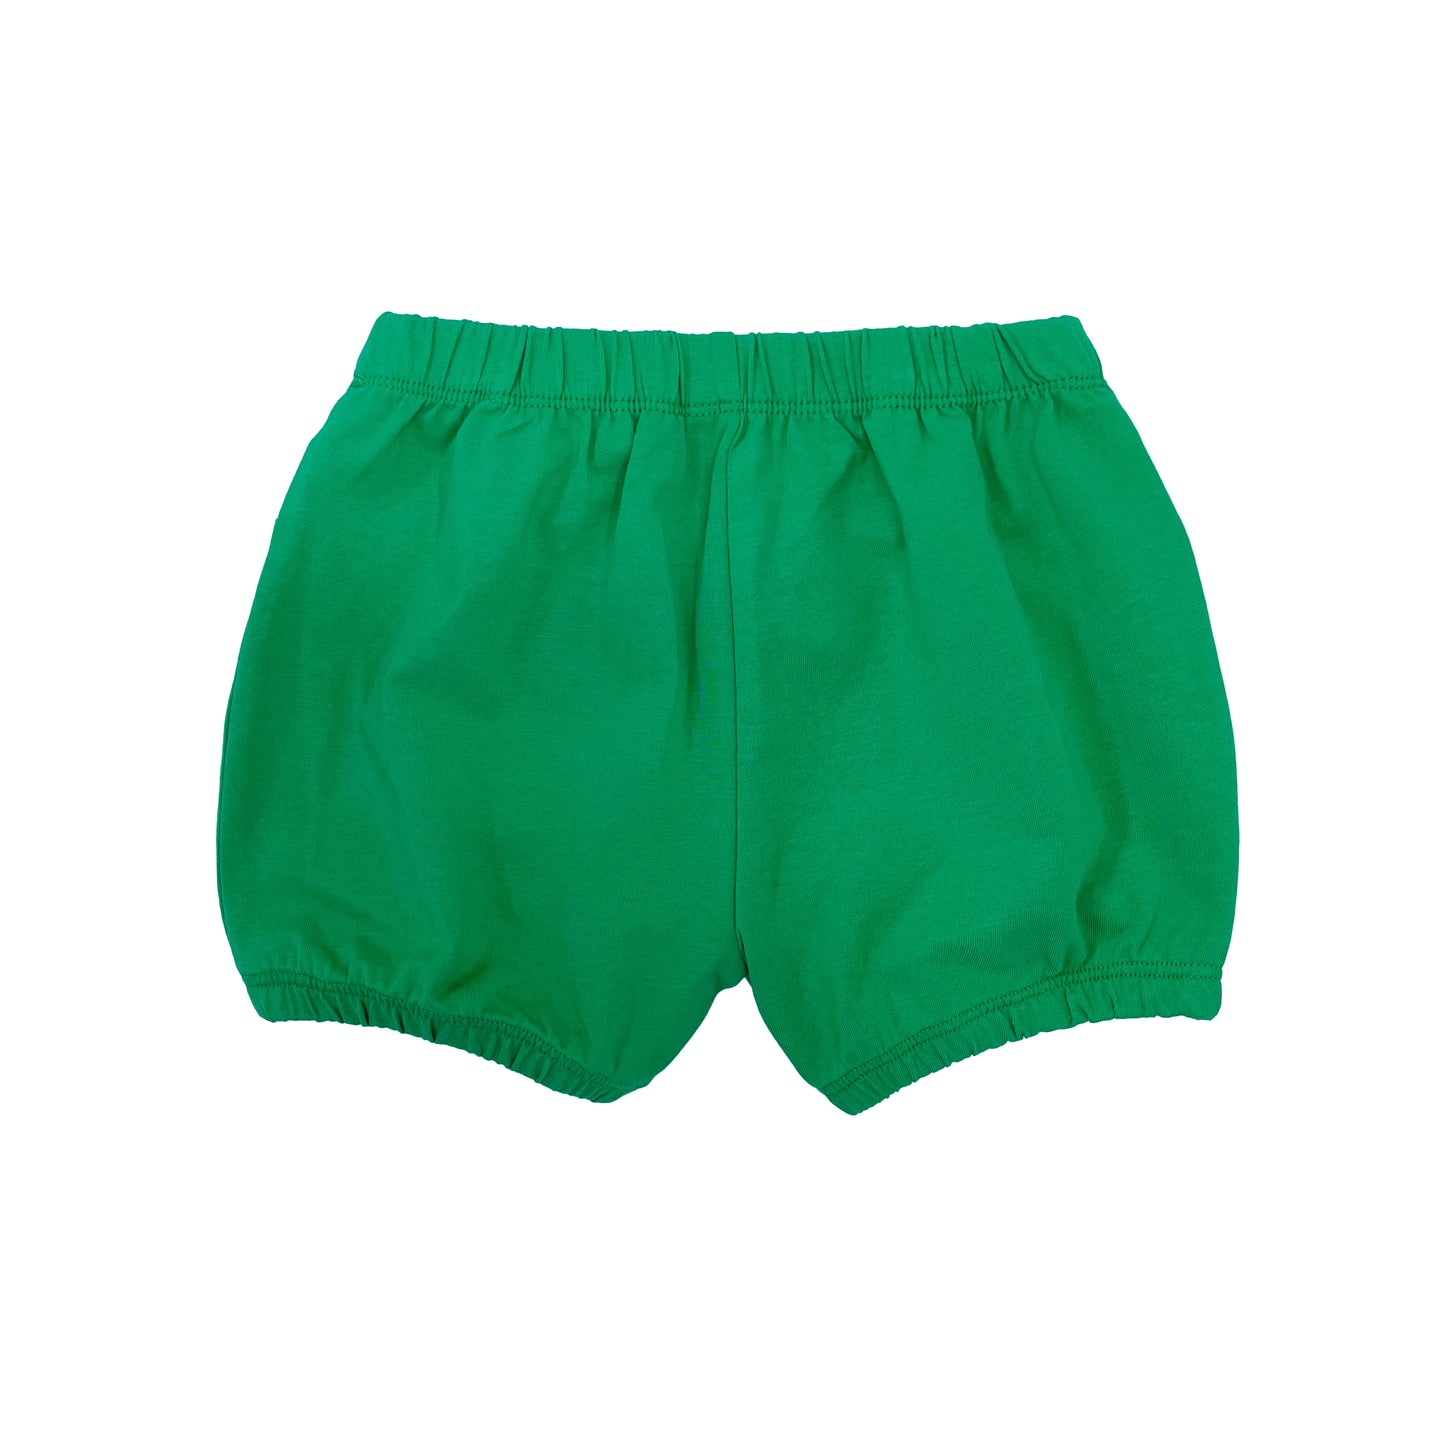 BABY SOLID COLOR BLOOMERS